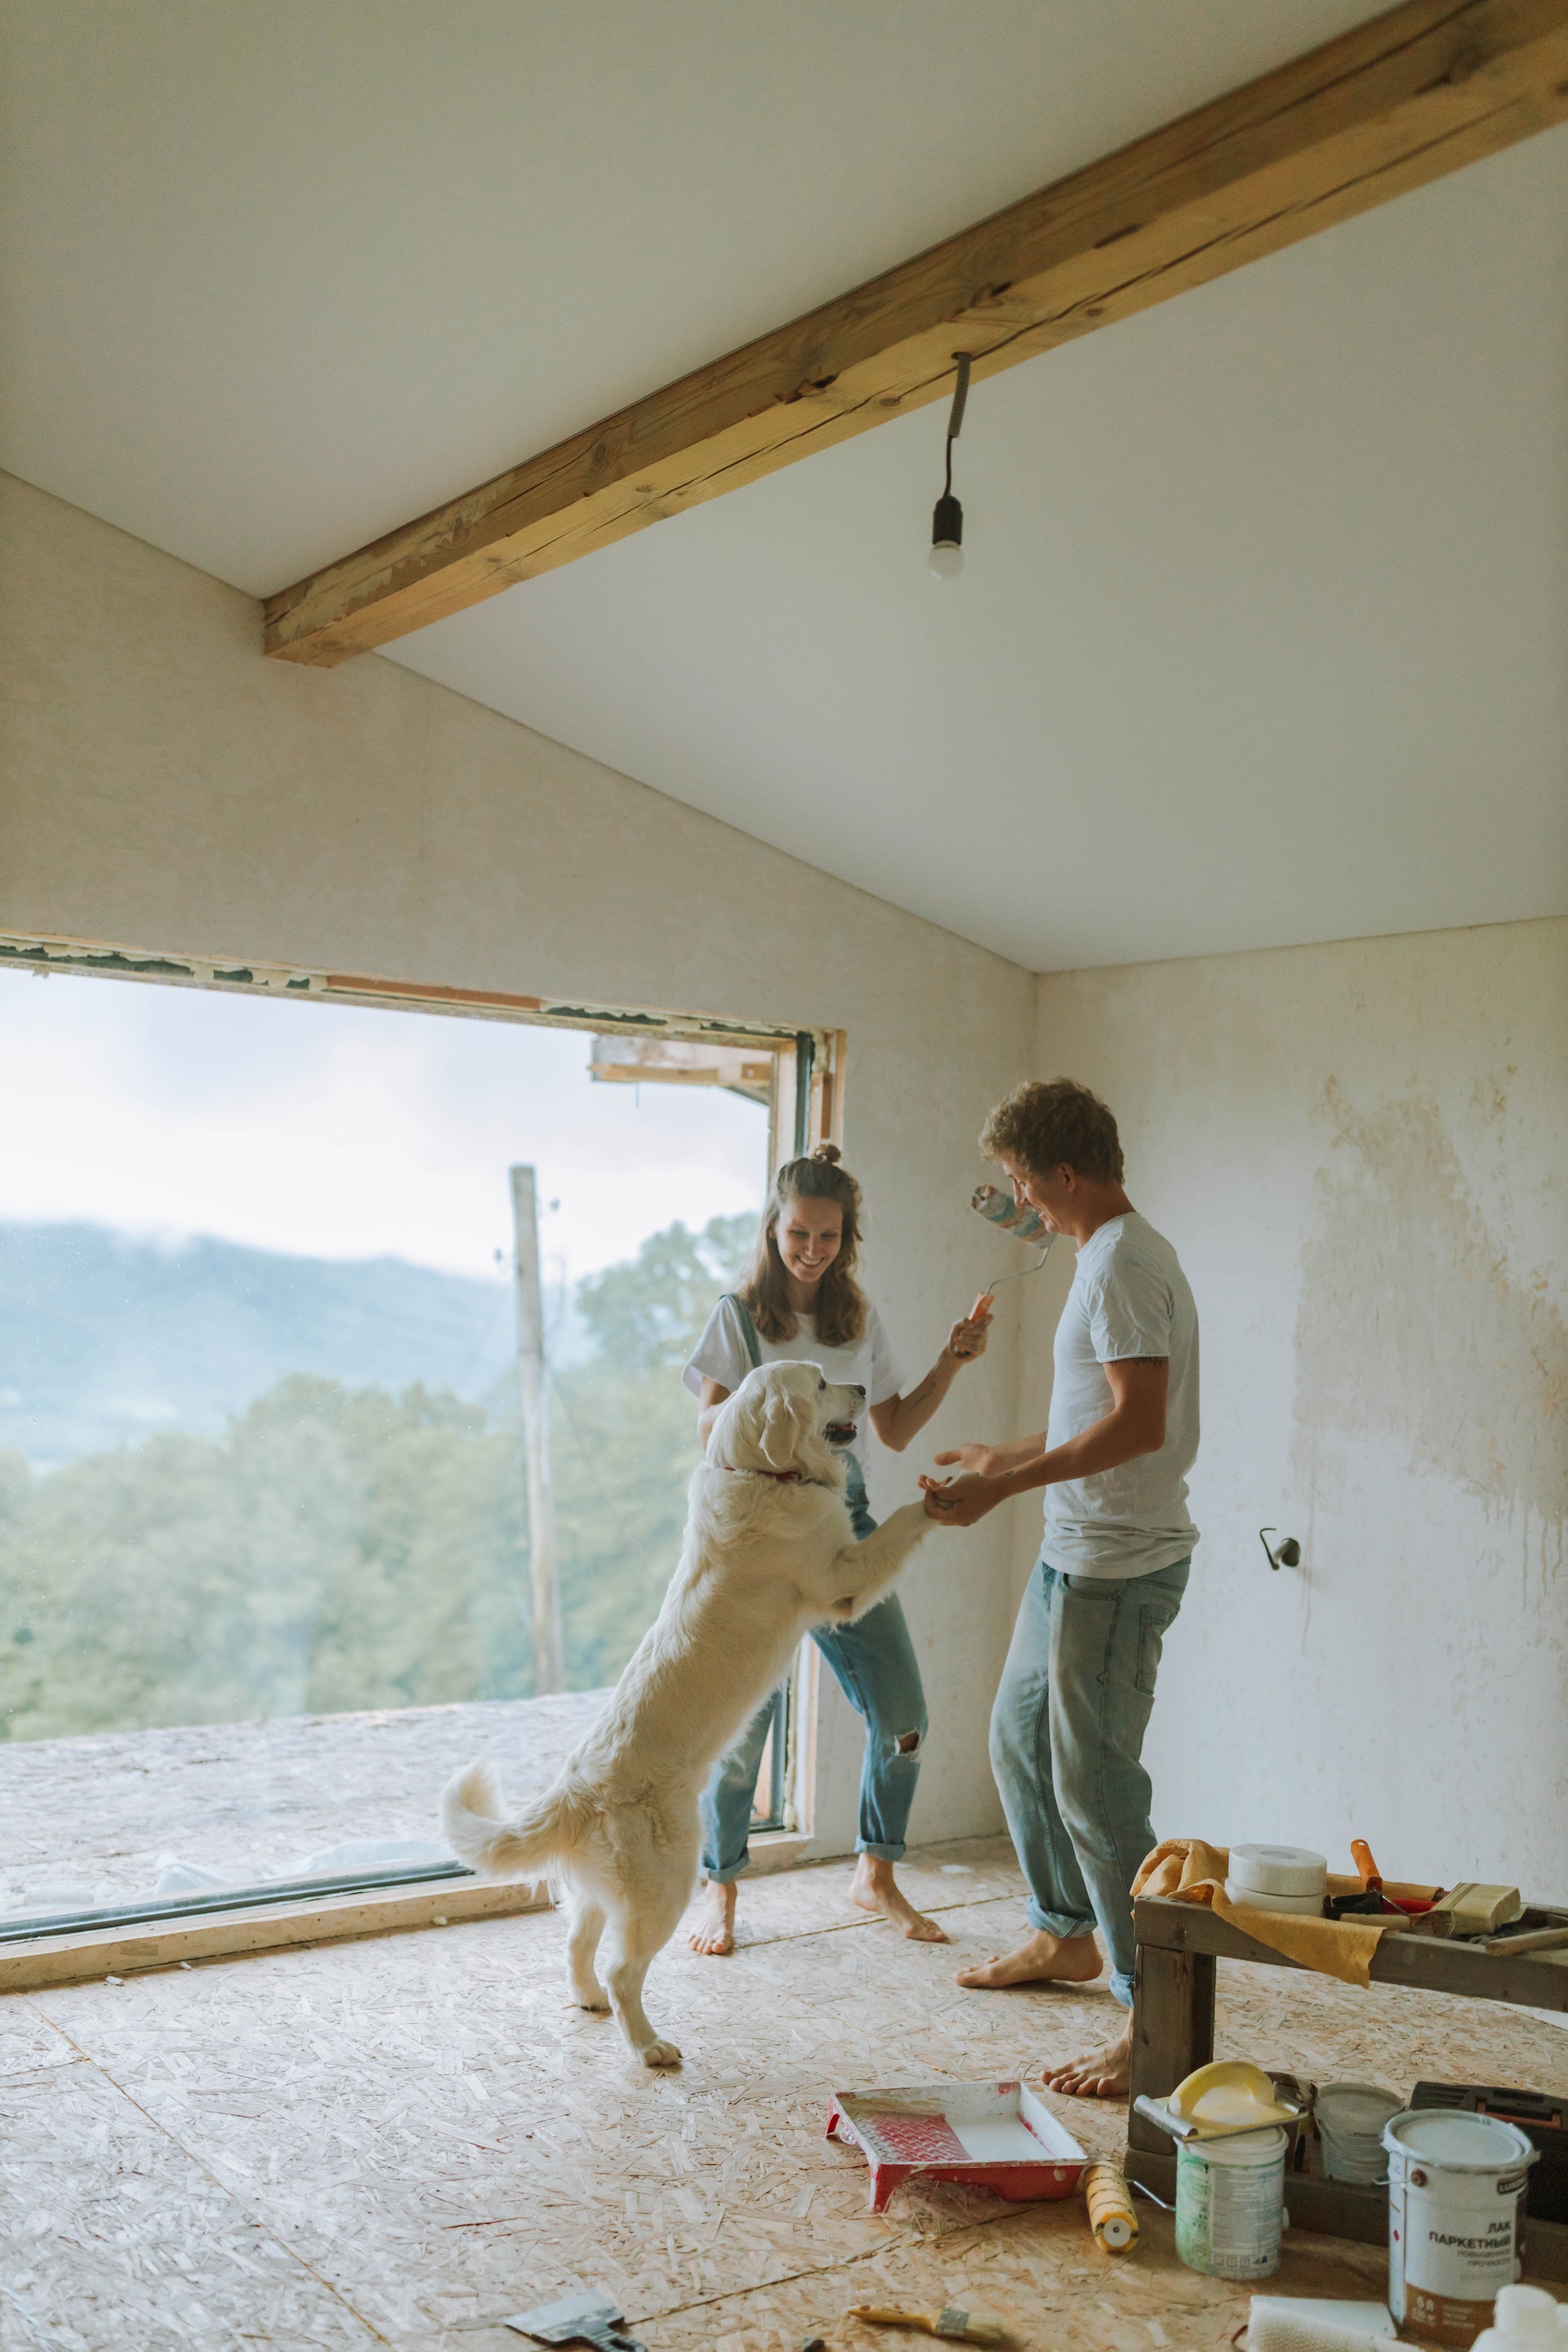 A couple with their dog | Source: Pexels